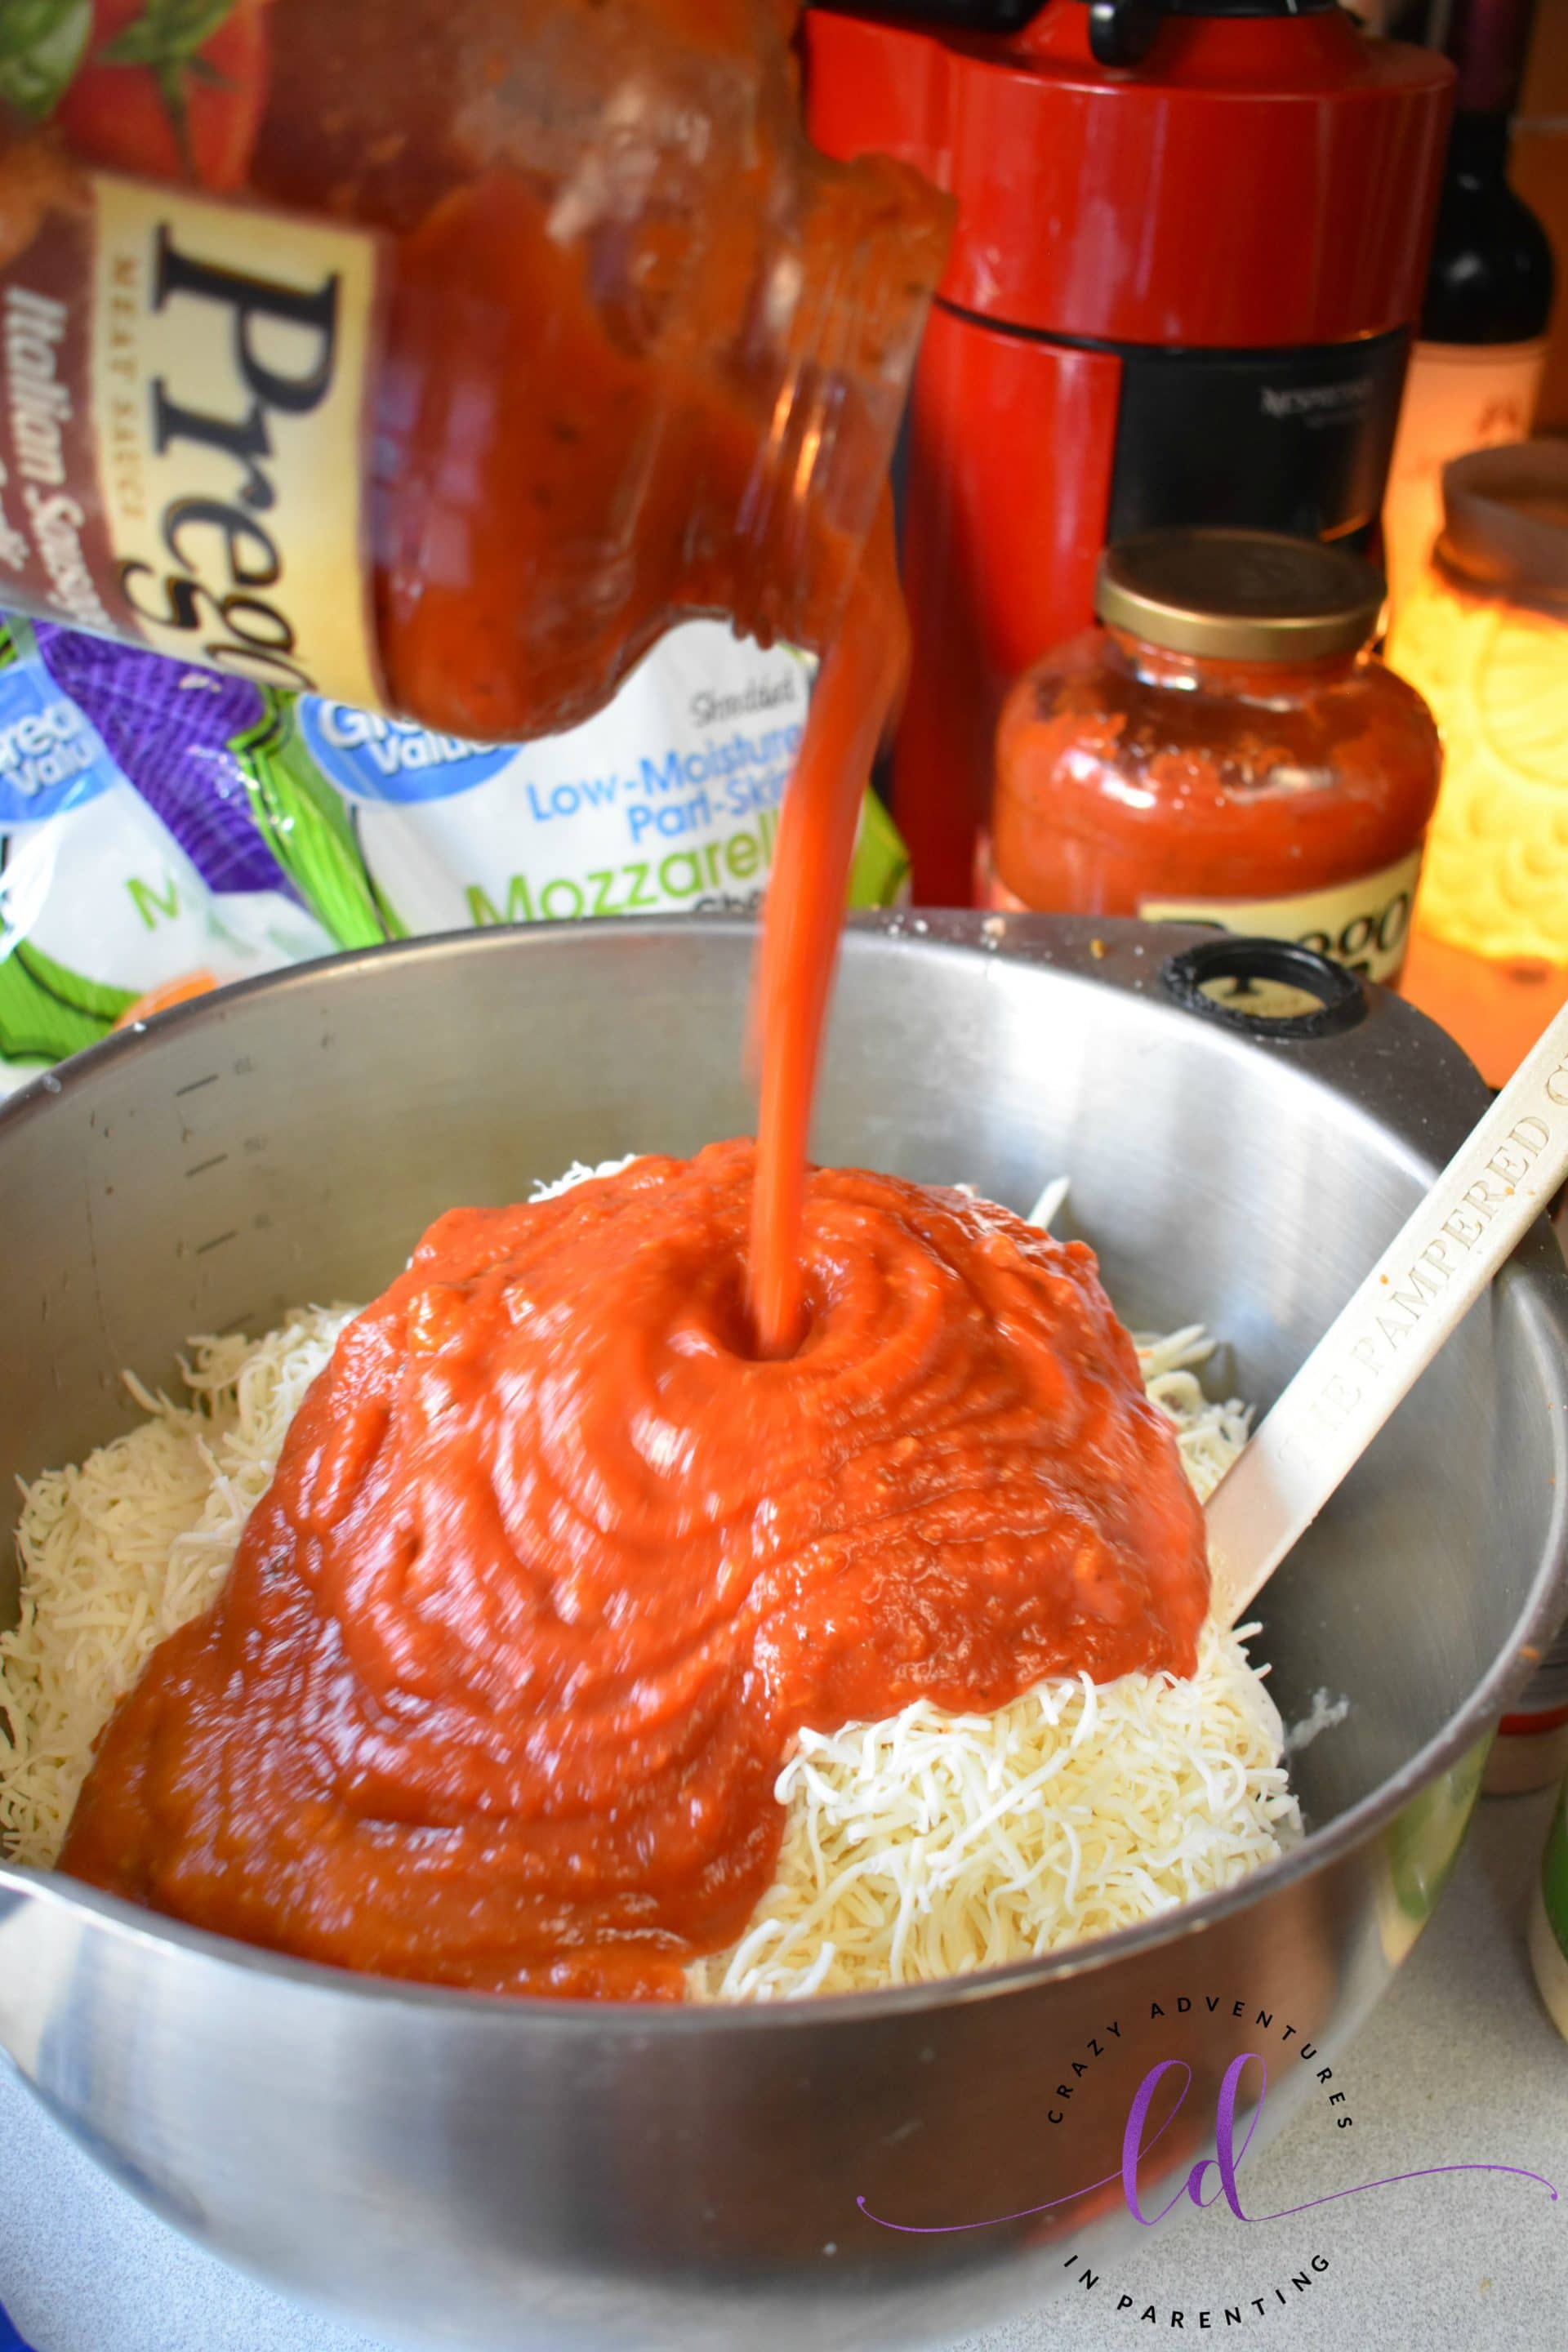 Tomato sauce in the bowl for homemade lasagna